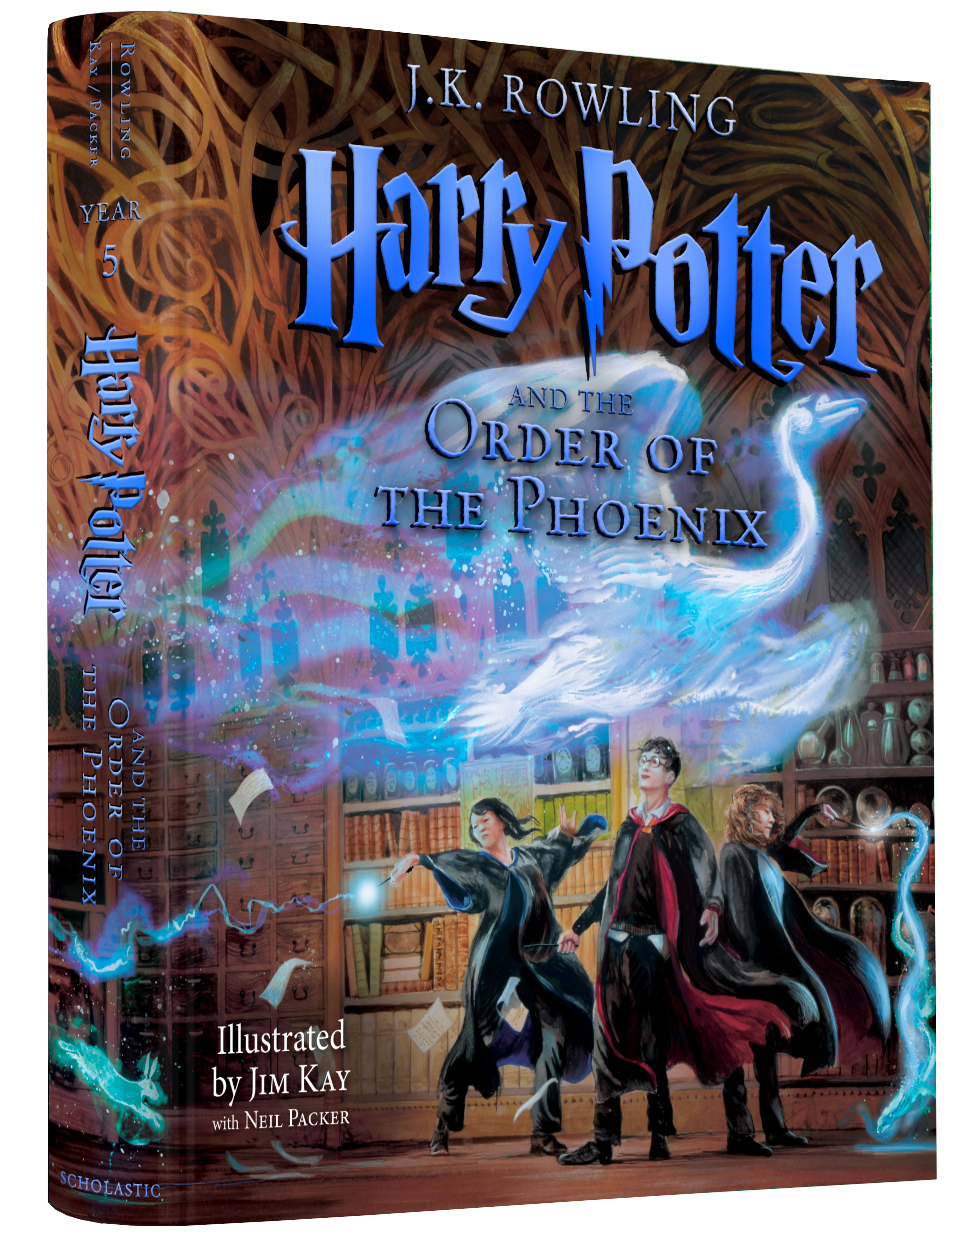 ‘Order of the Phoenix’ illustrated edition (US)